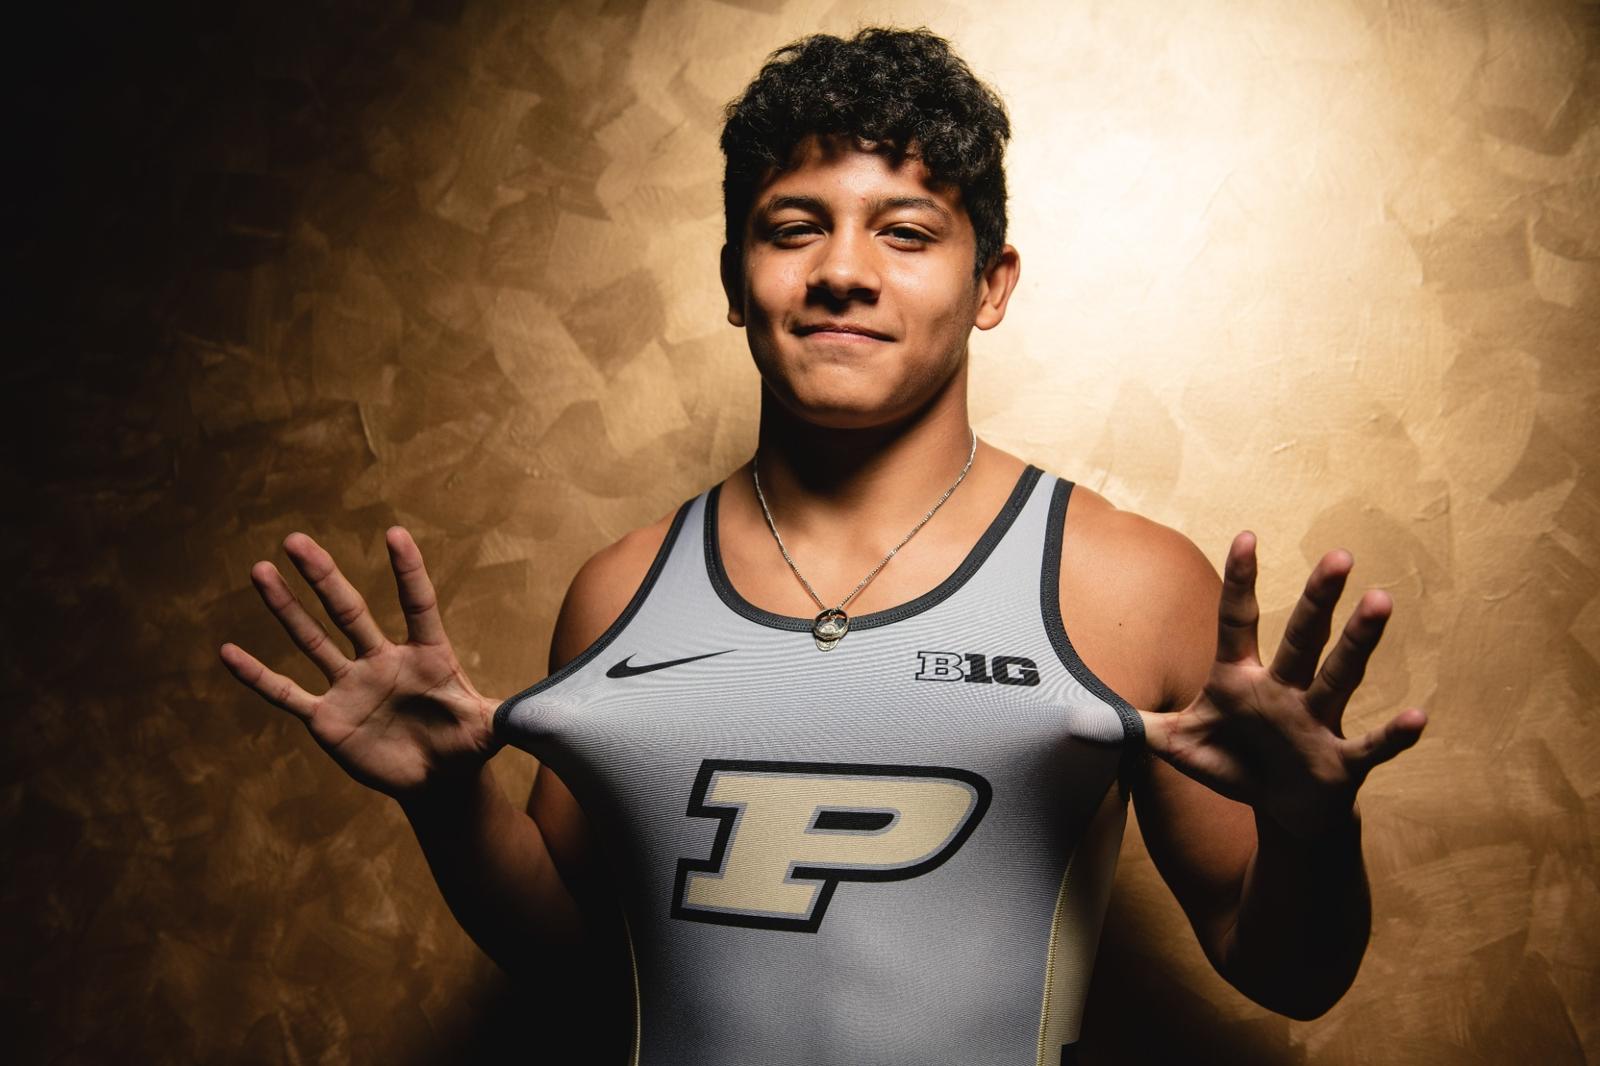 Isaiah Quintero Takes Fifth at US Open, Secures Spot at U20 World Team Trials